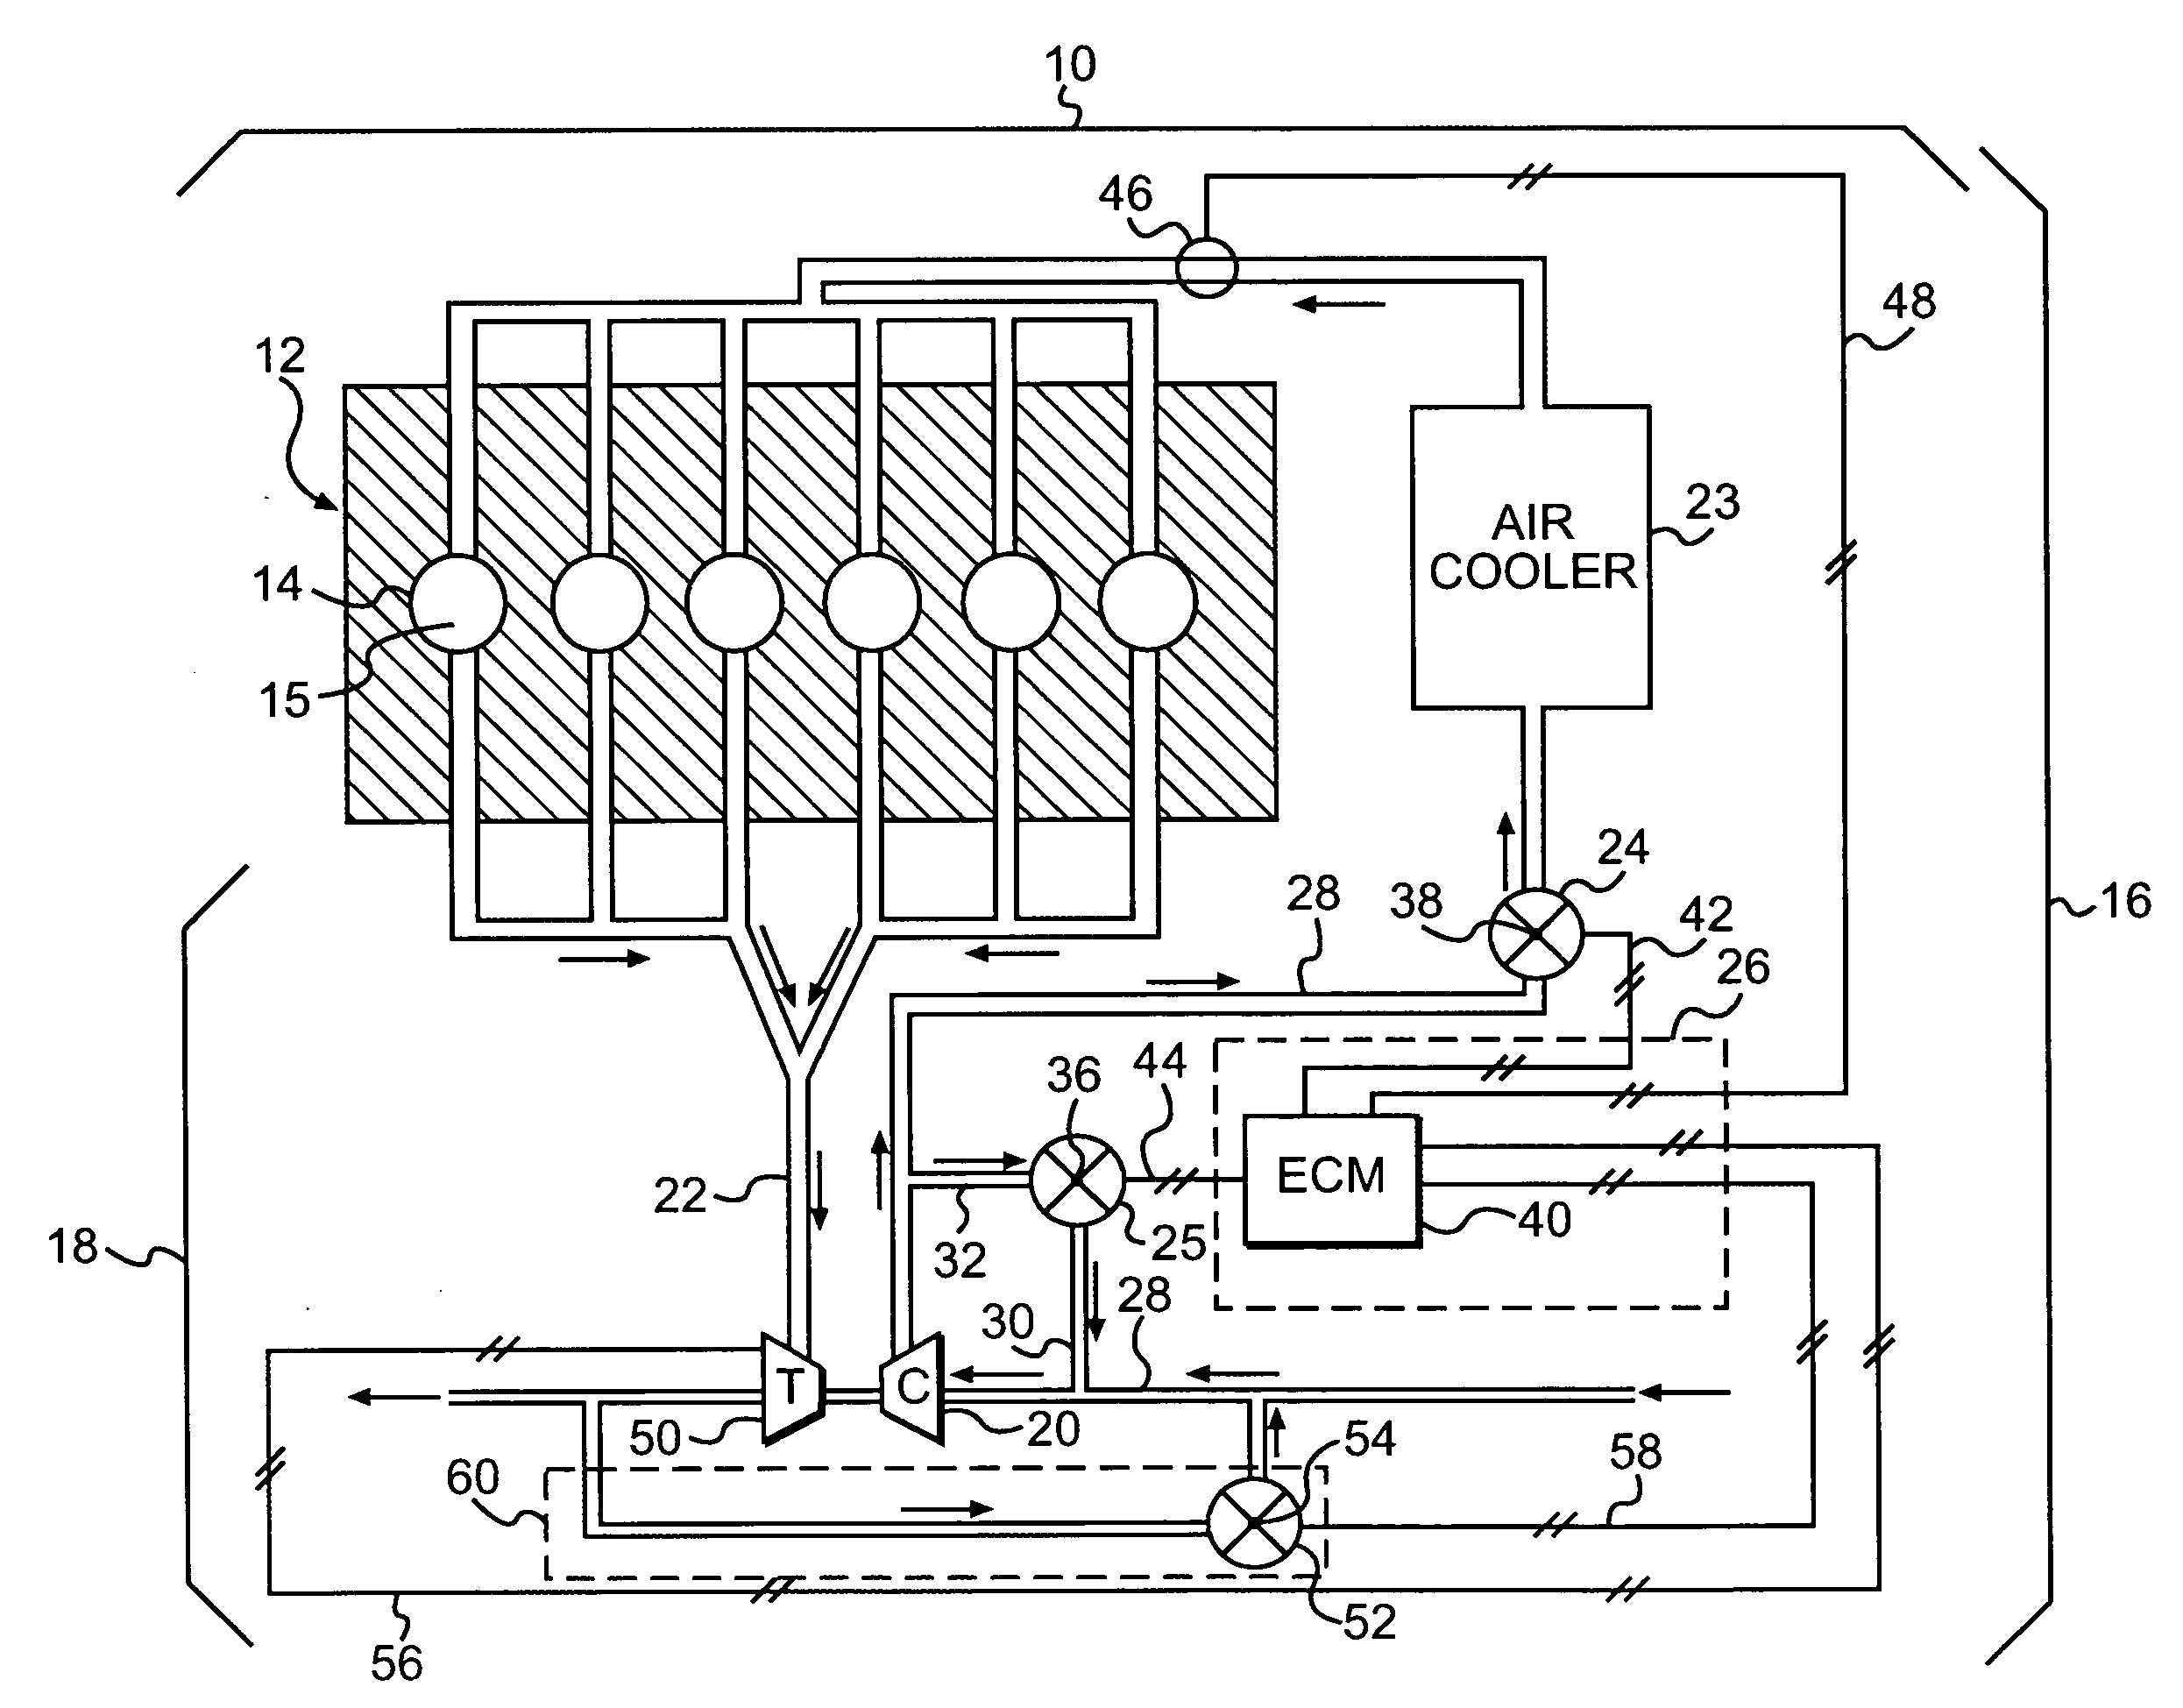 Decoupling control strategy for interrelated air system components